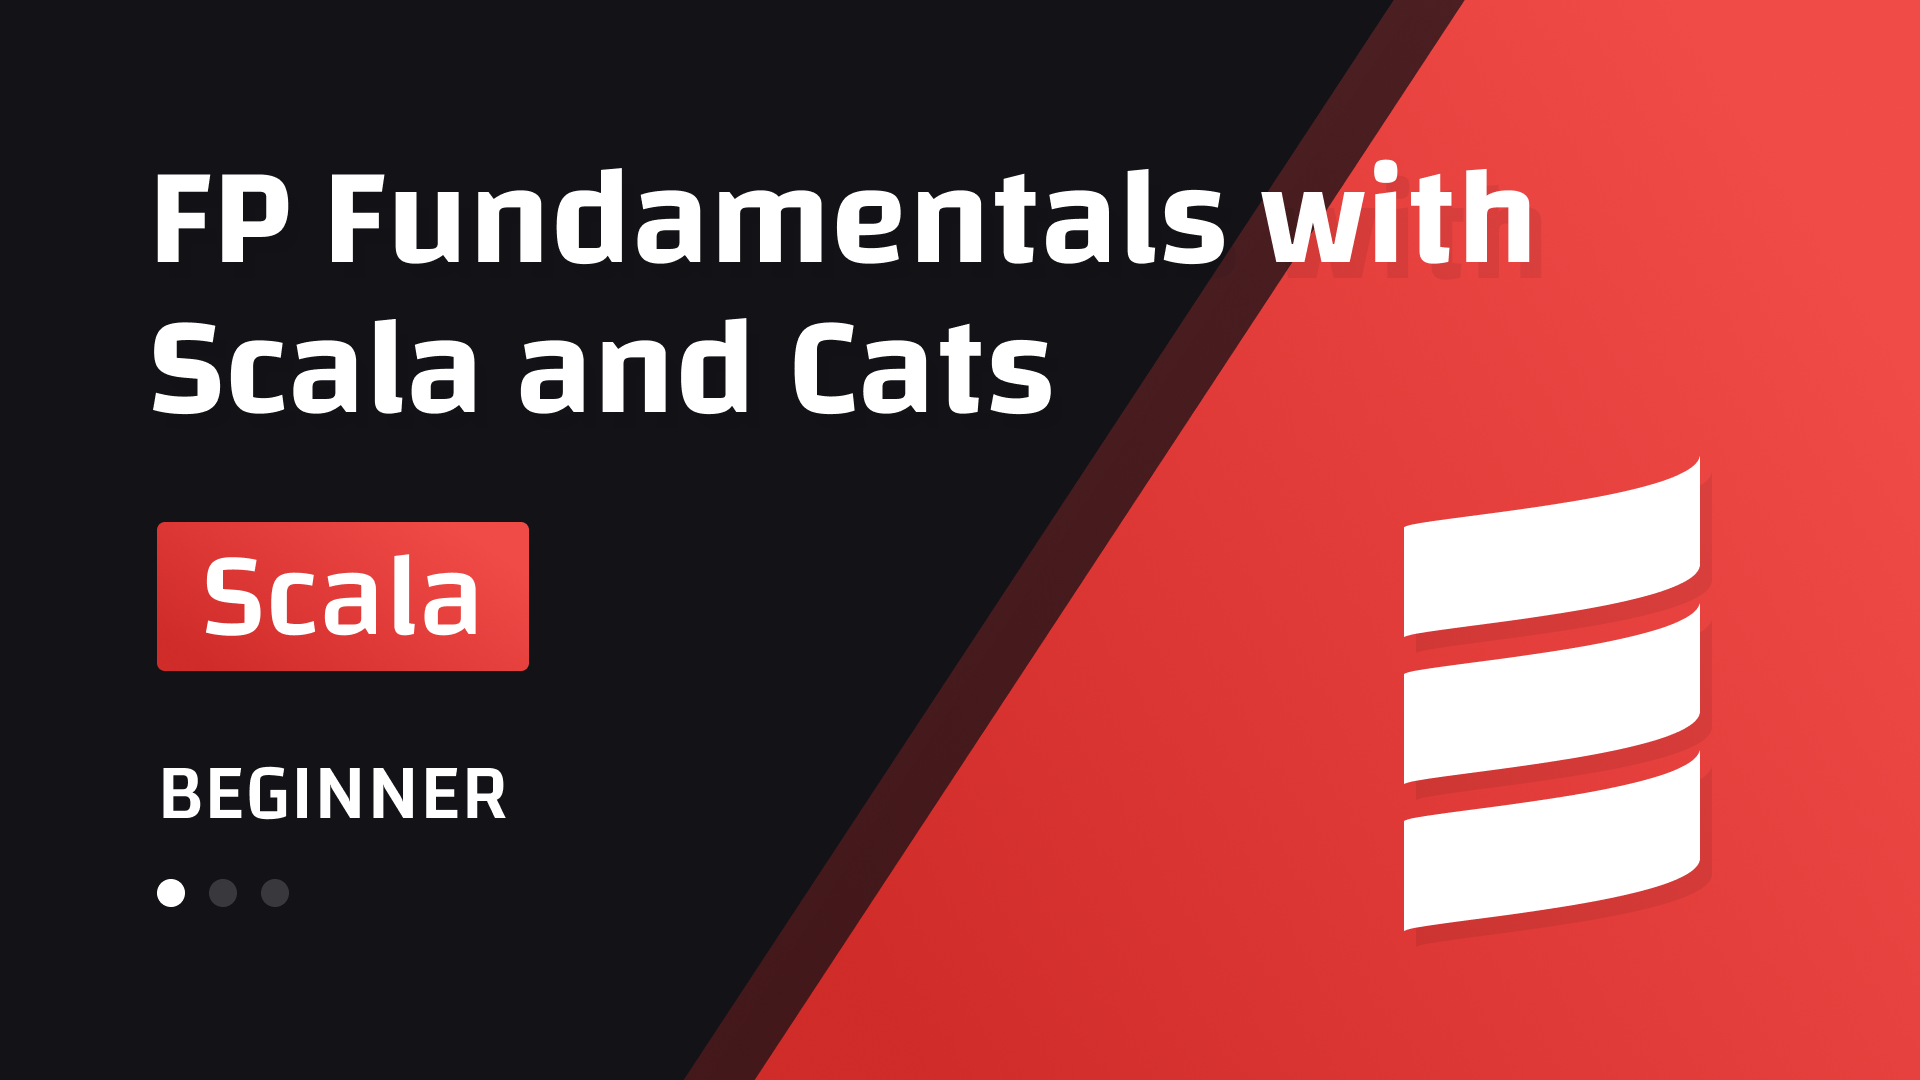 FP Fundamentals with Scala and Cats